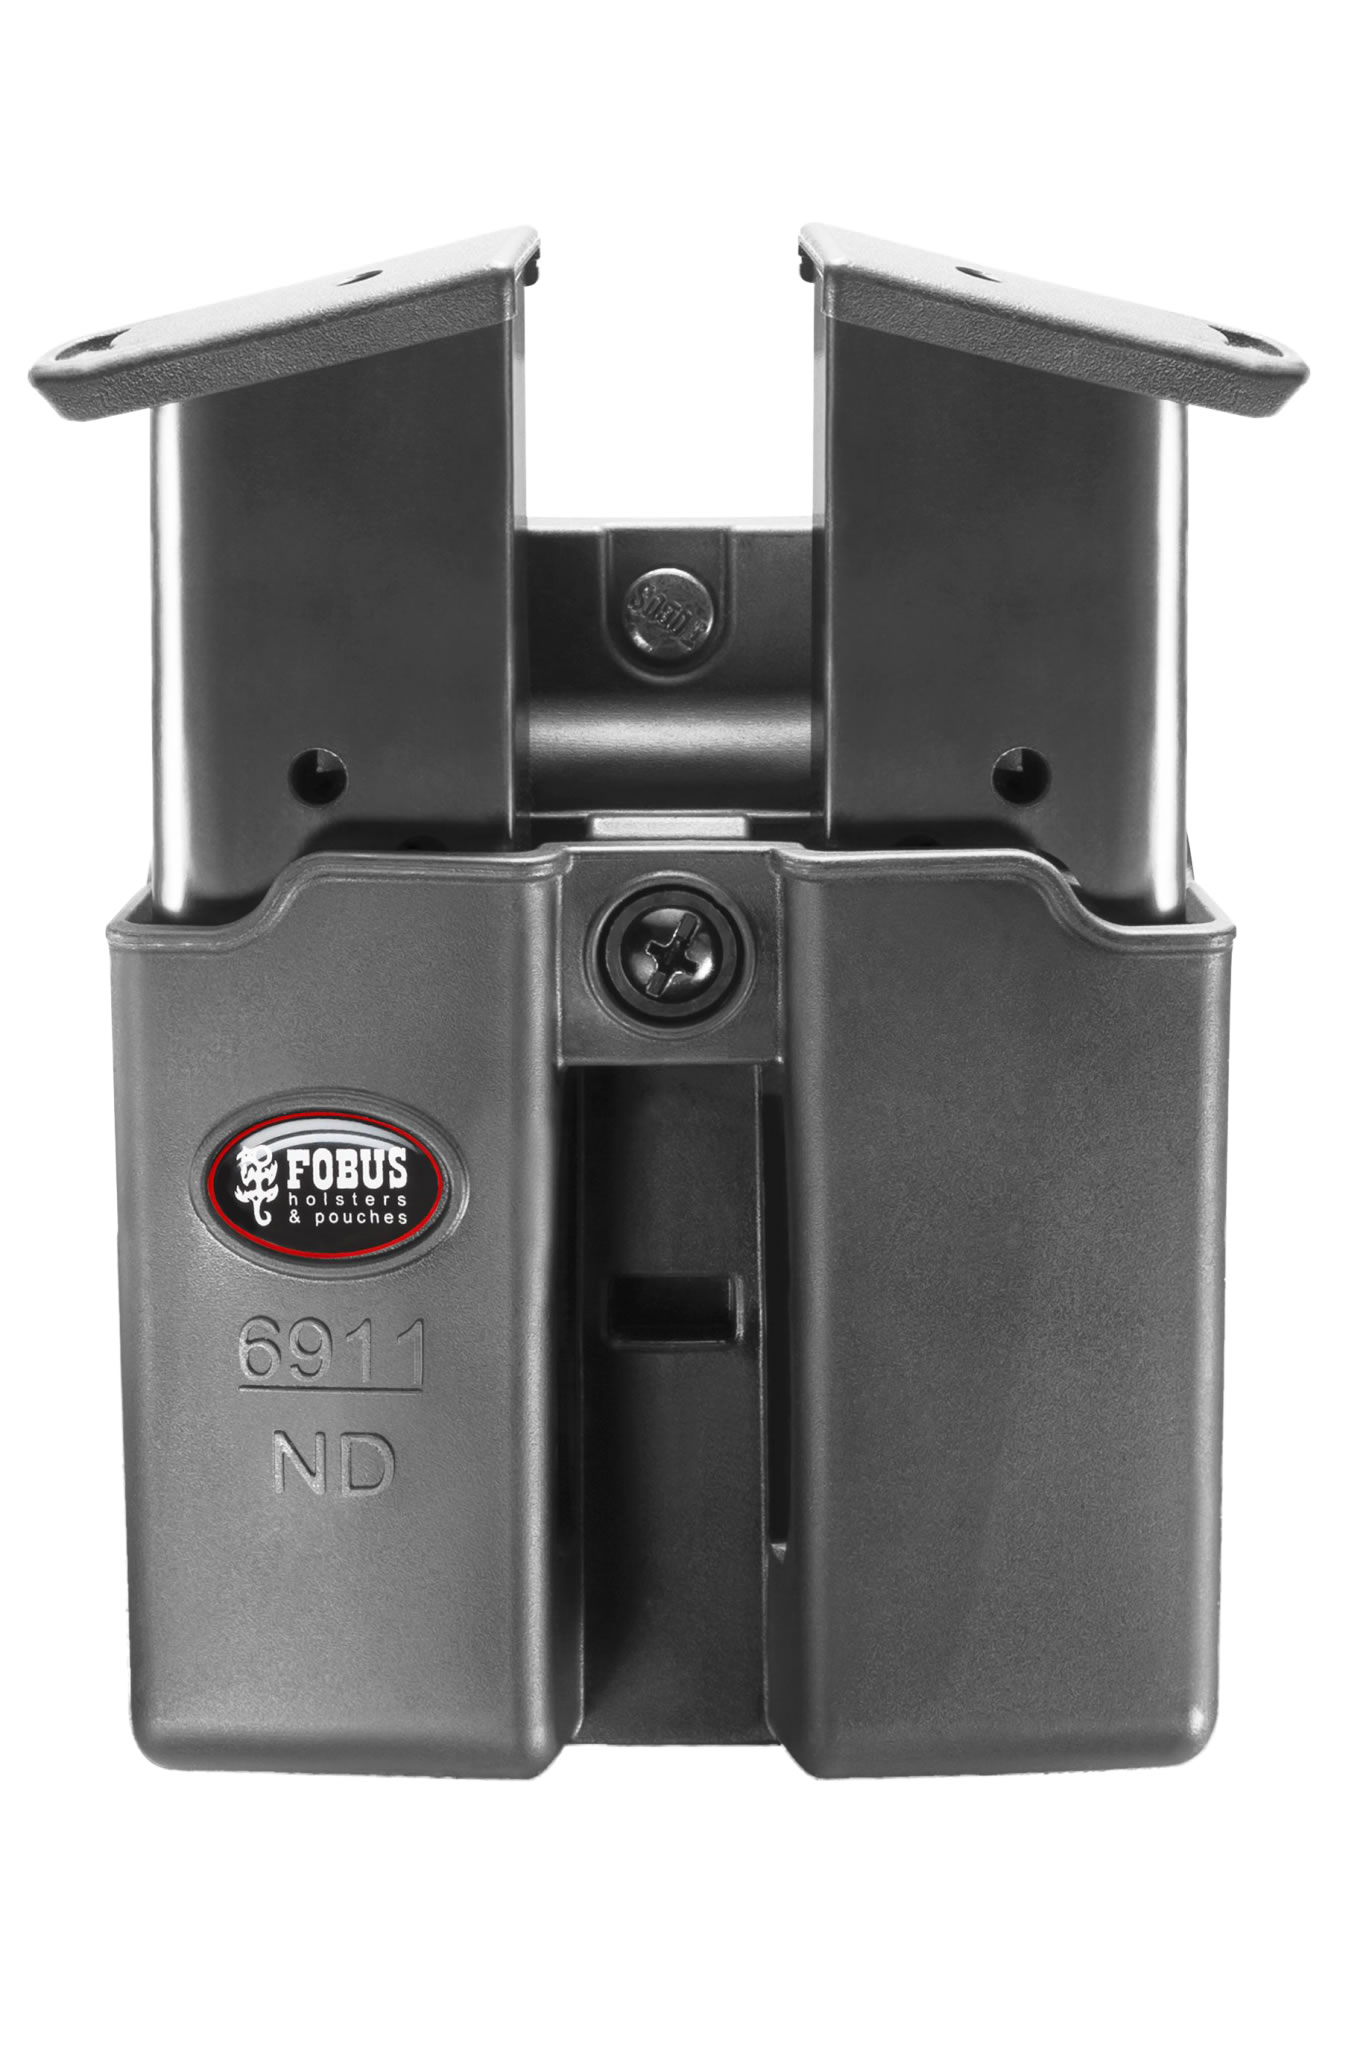 6912 ND Fobus Double Magazine Pouch For Sig Sauer P365 9mm Single-Stack 